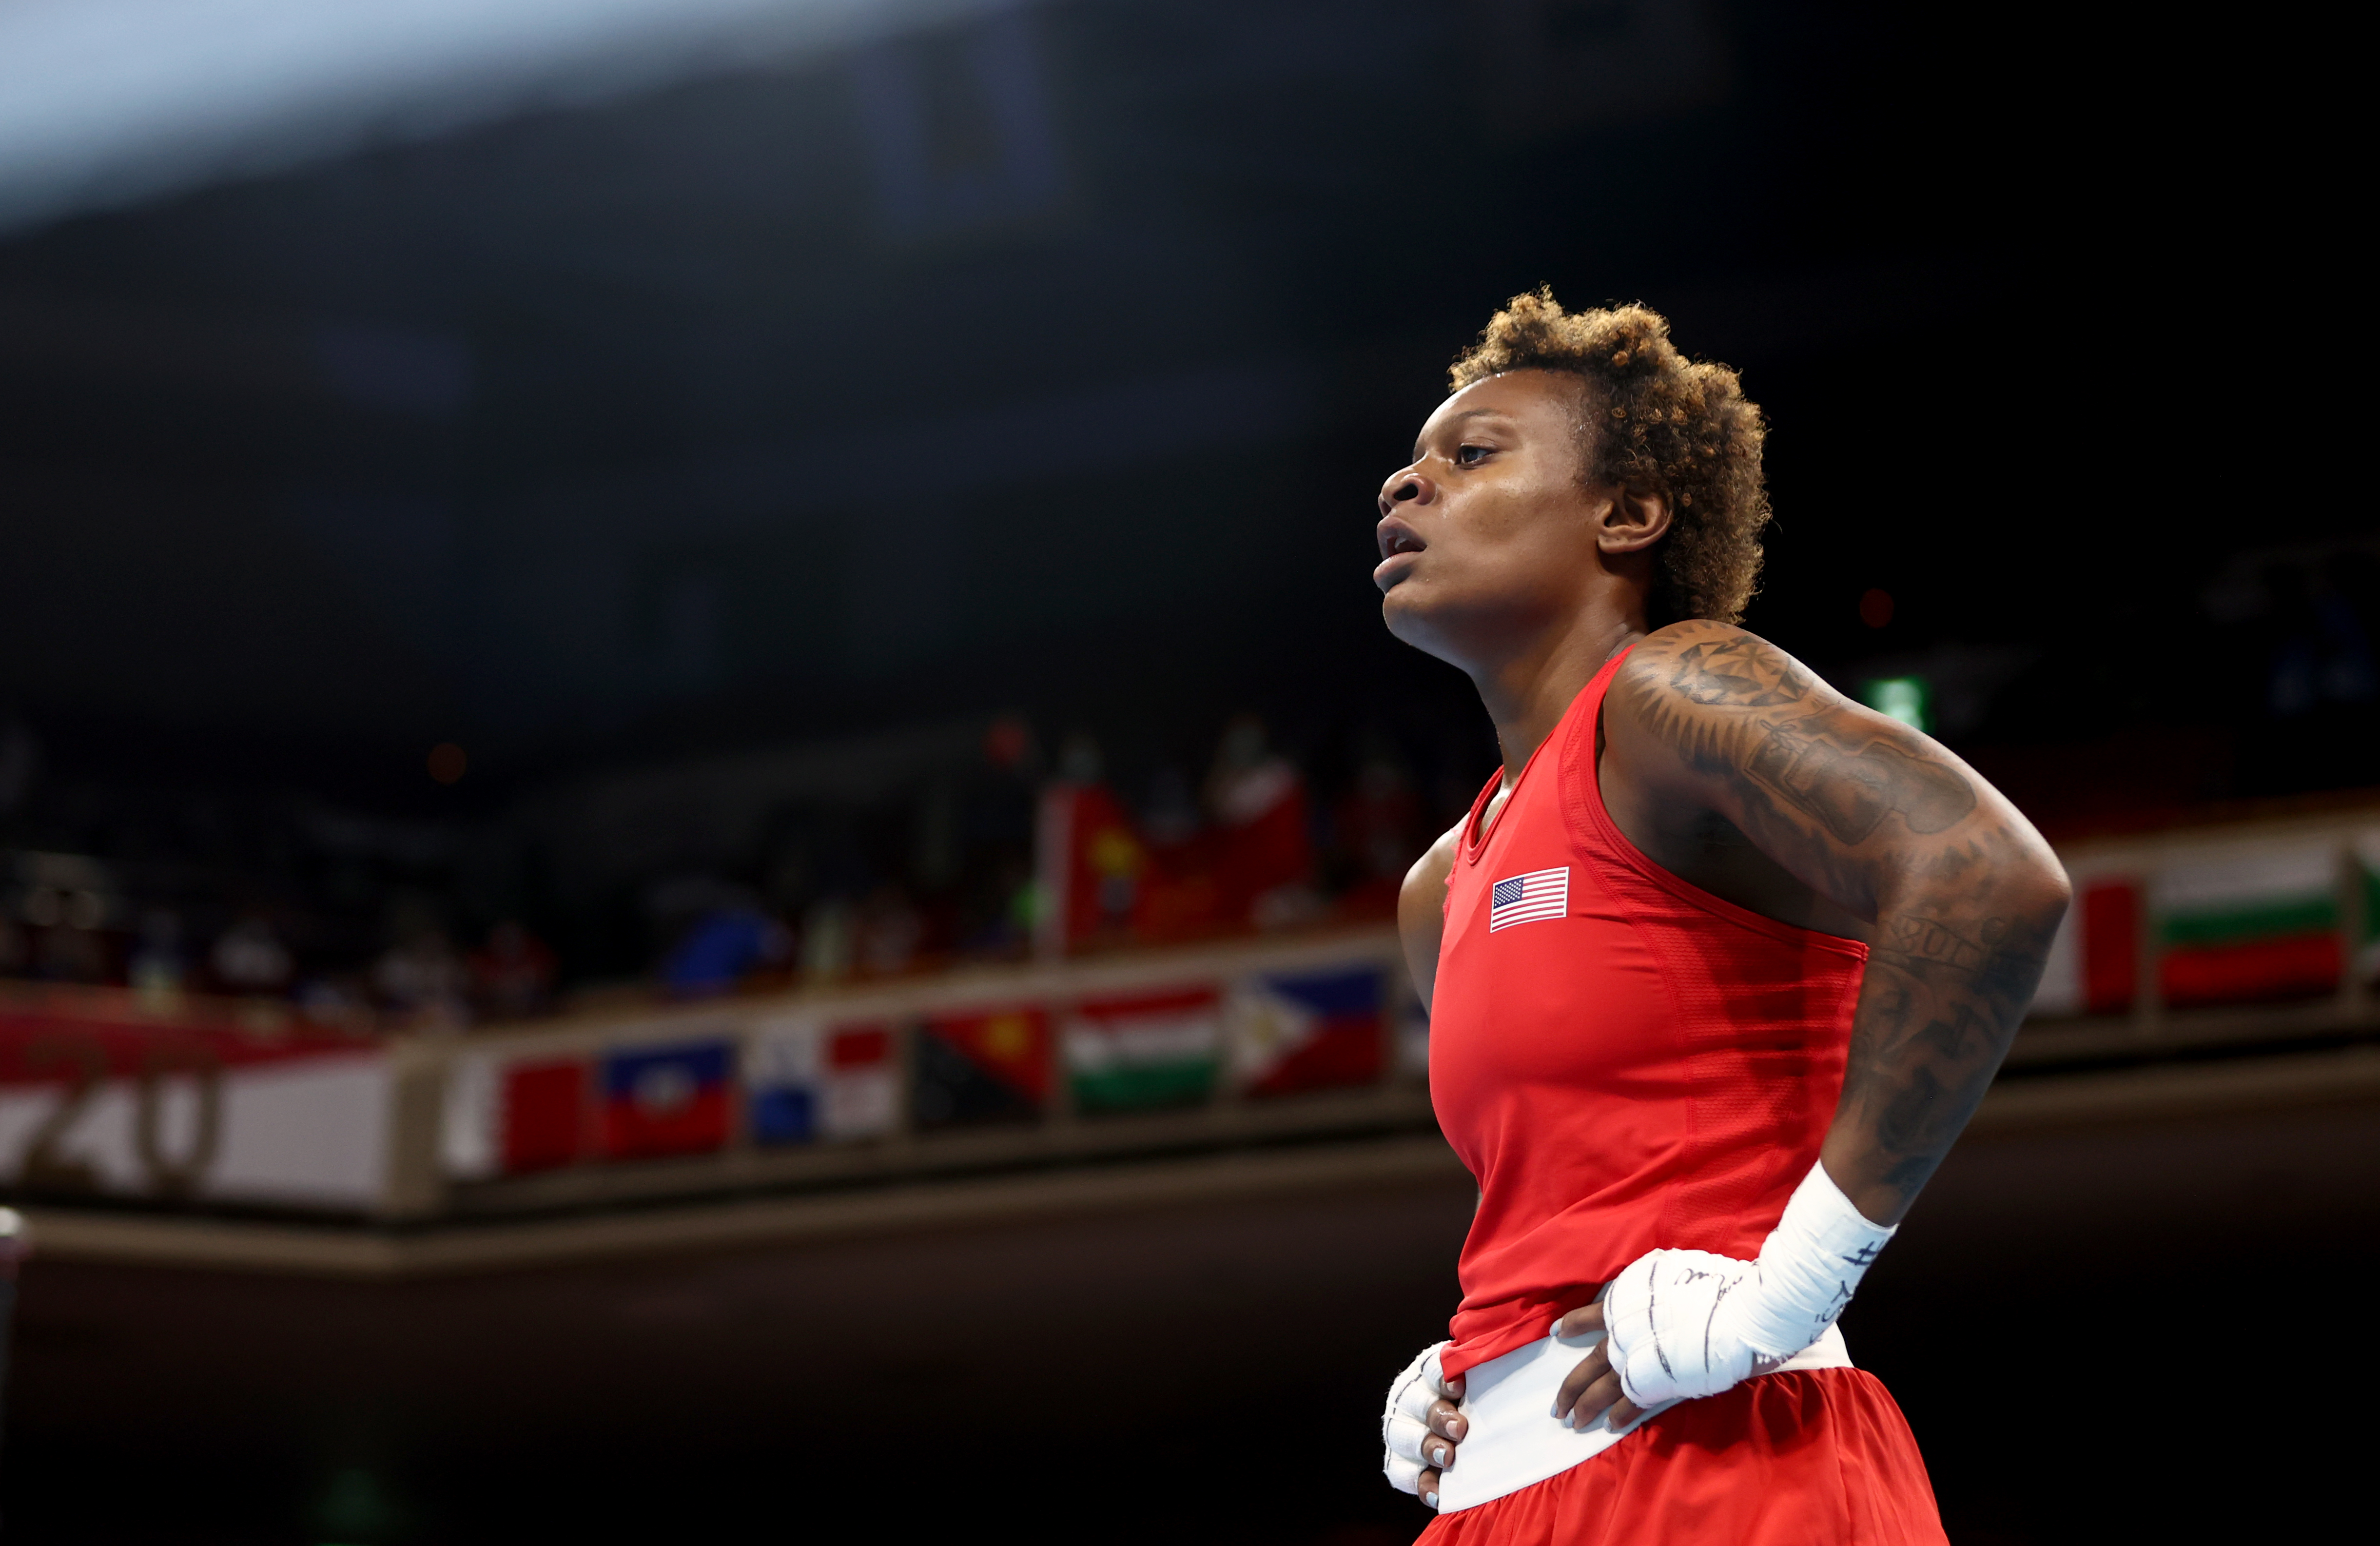 Tokyo 2020 Olympics -  Boxing - Women's Welterweight - Semifinal - Kokugikan Arena - Tokyo, Japan - August 4, 2021 - Oshae Jones of the United States after her fight against Gu Hong of China Pool via REUTERS/Buda Mendes